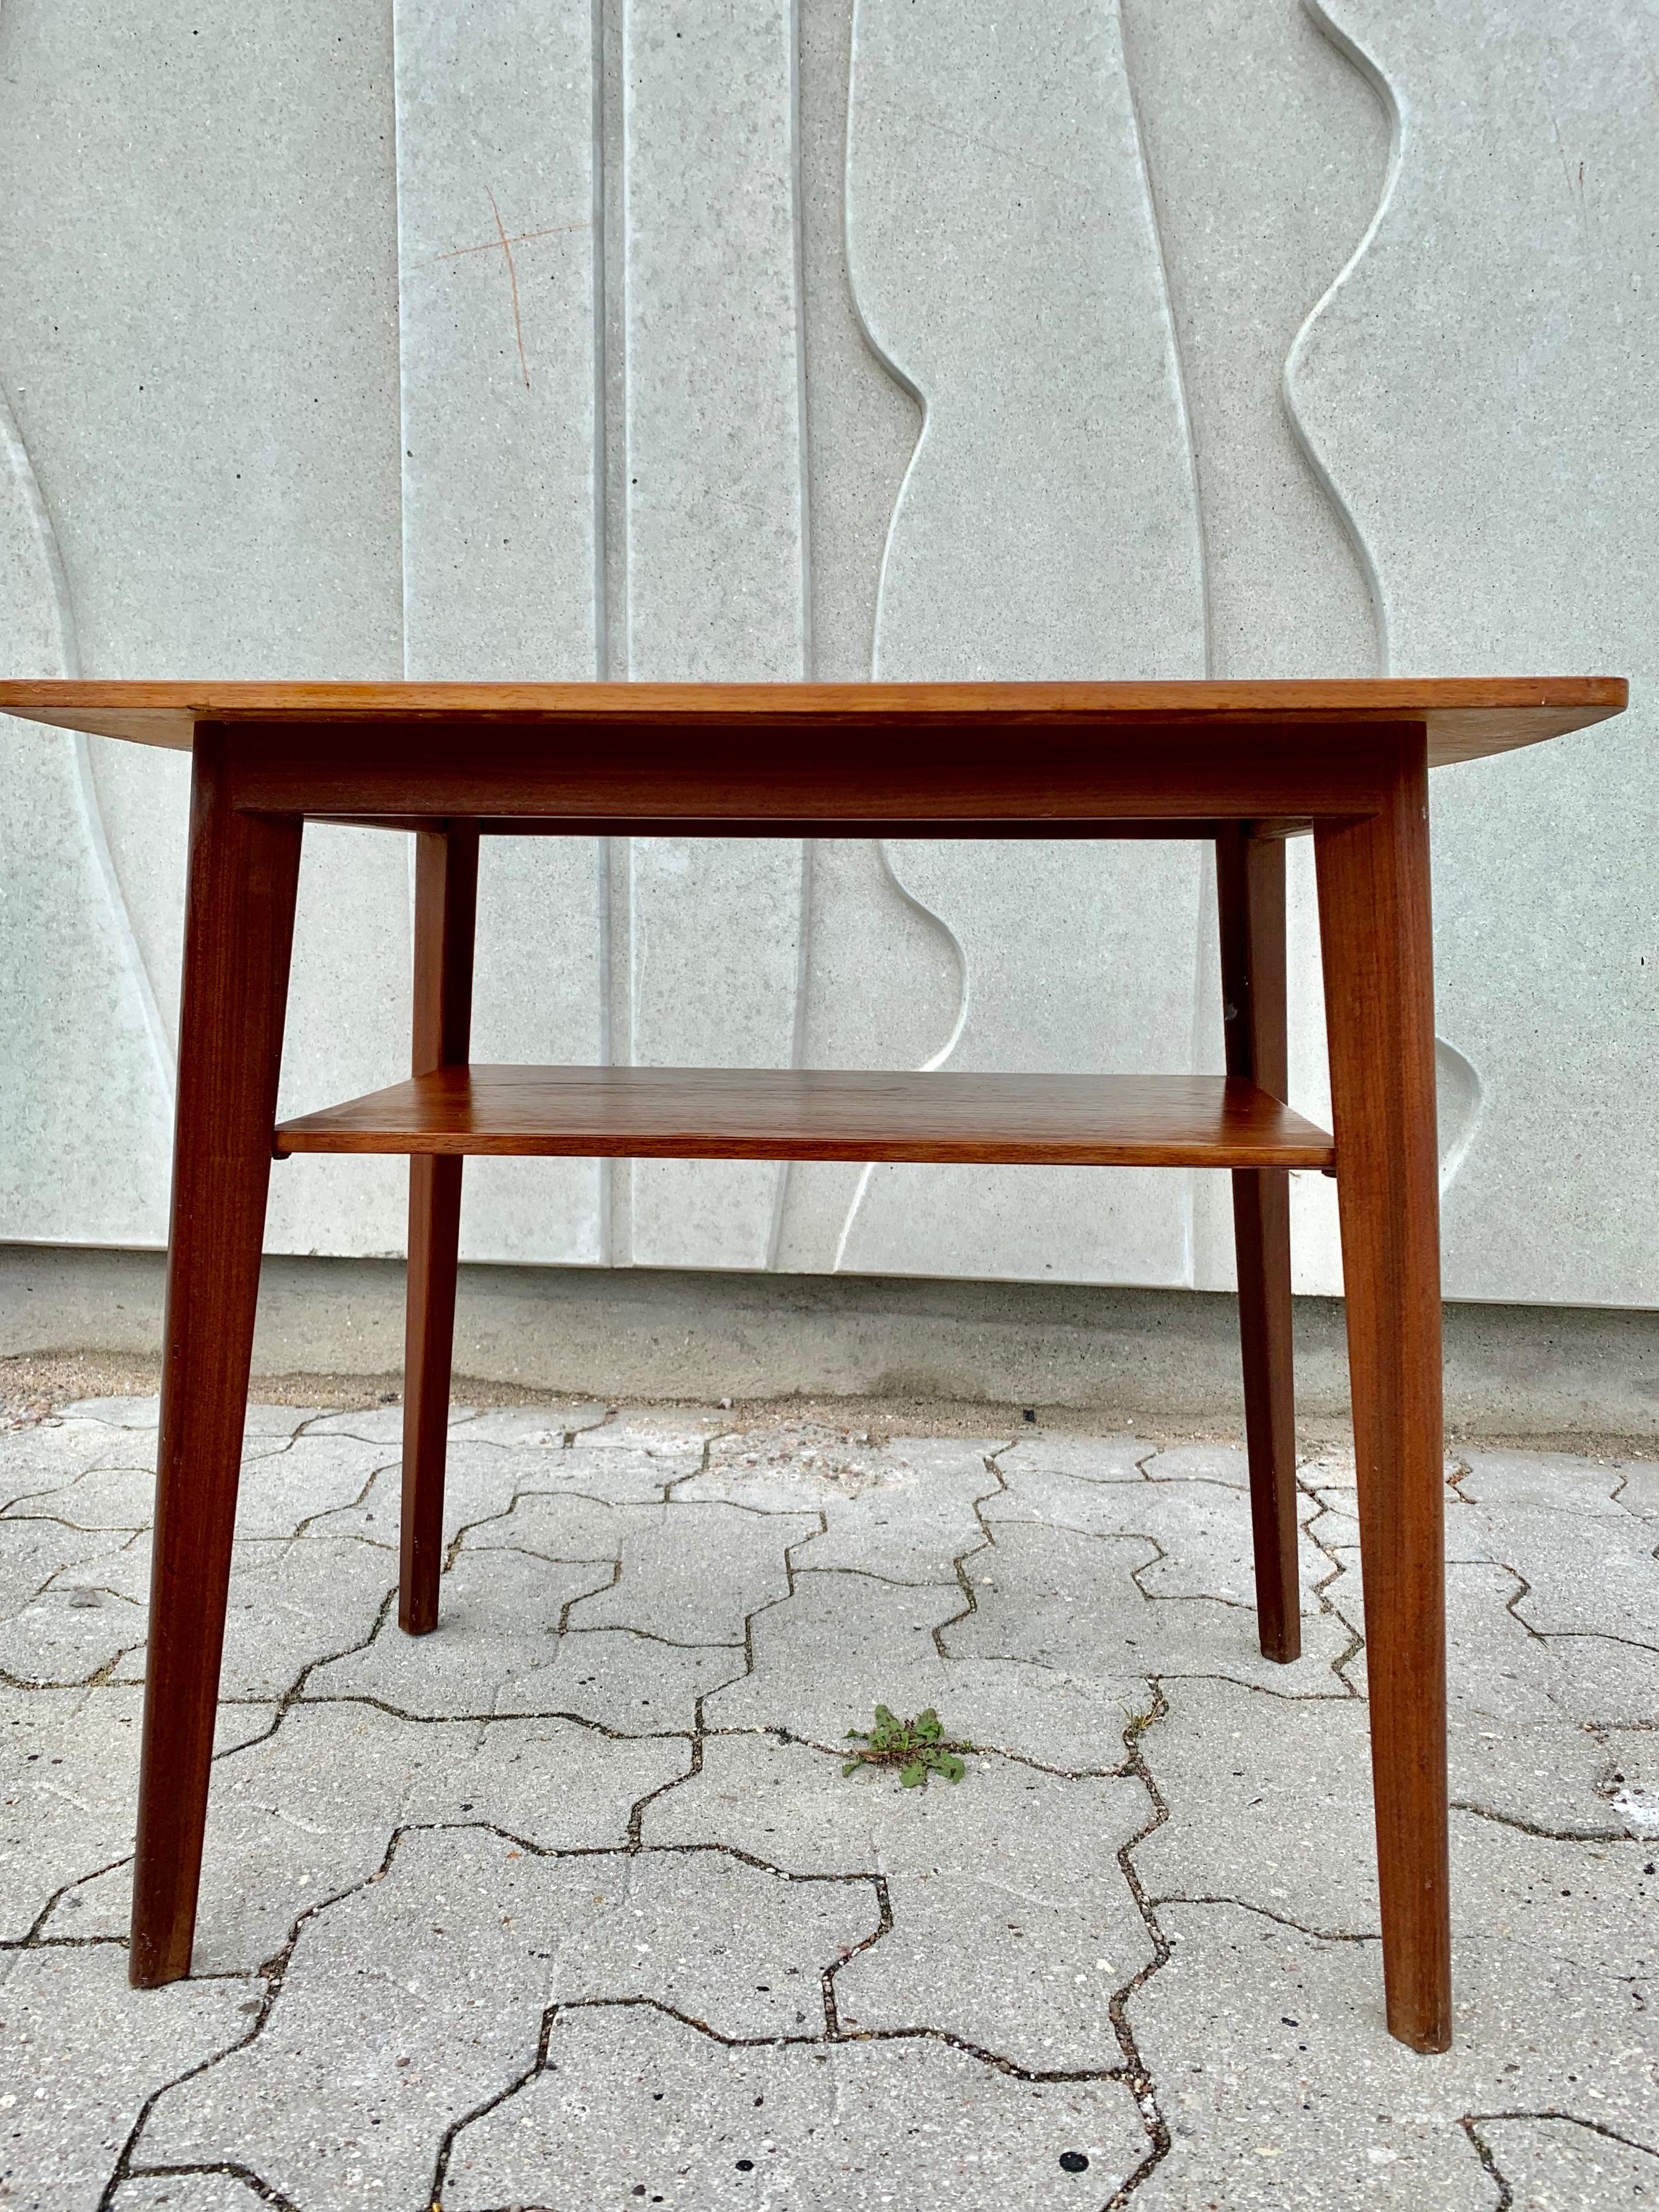 Small Danish side or coffee table with angular legs. Stunning wooden grains. Very good craftsmanship.